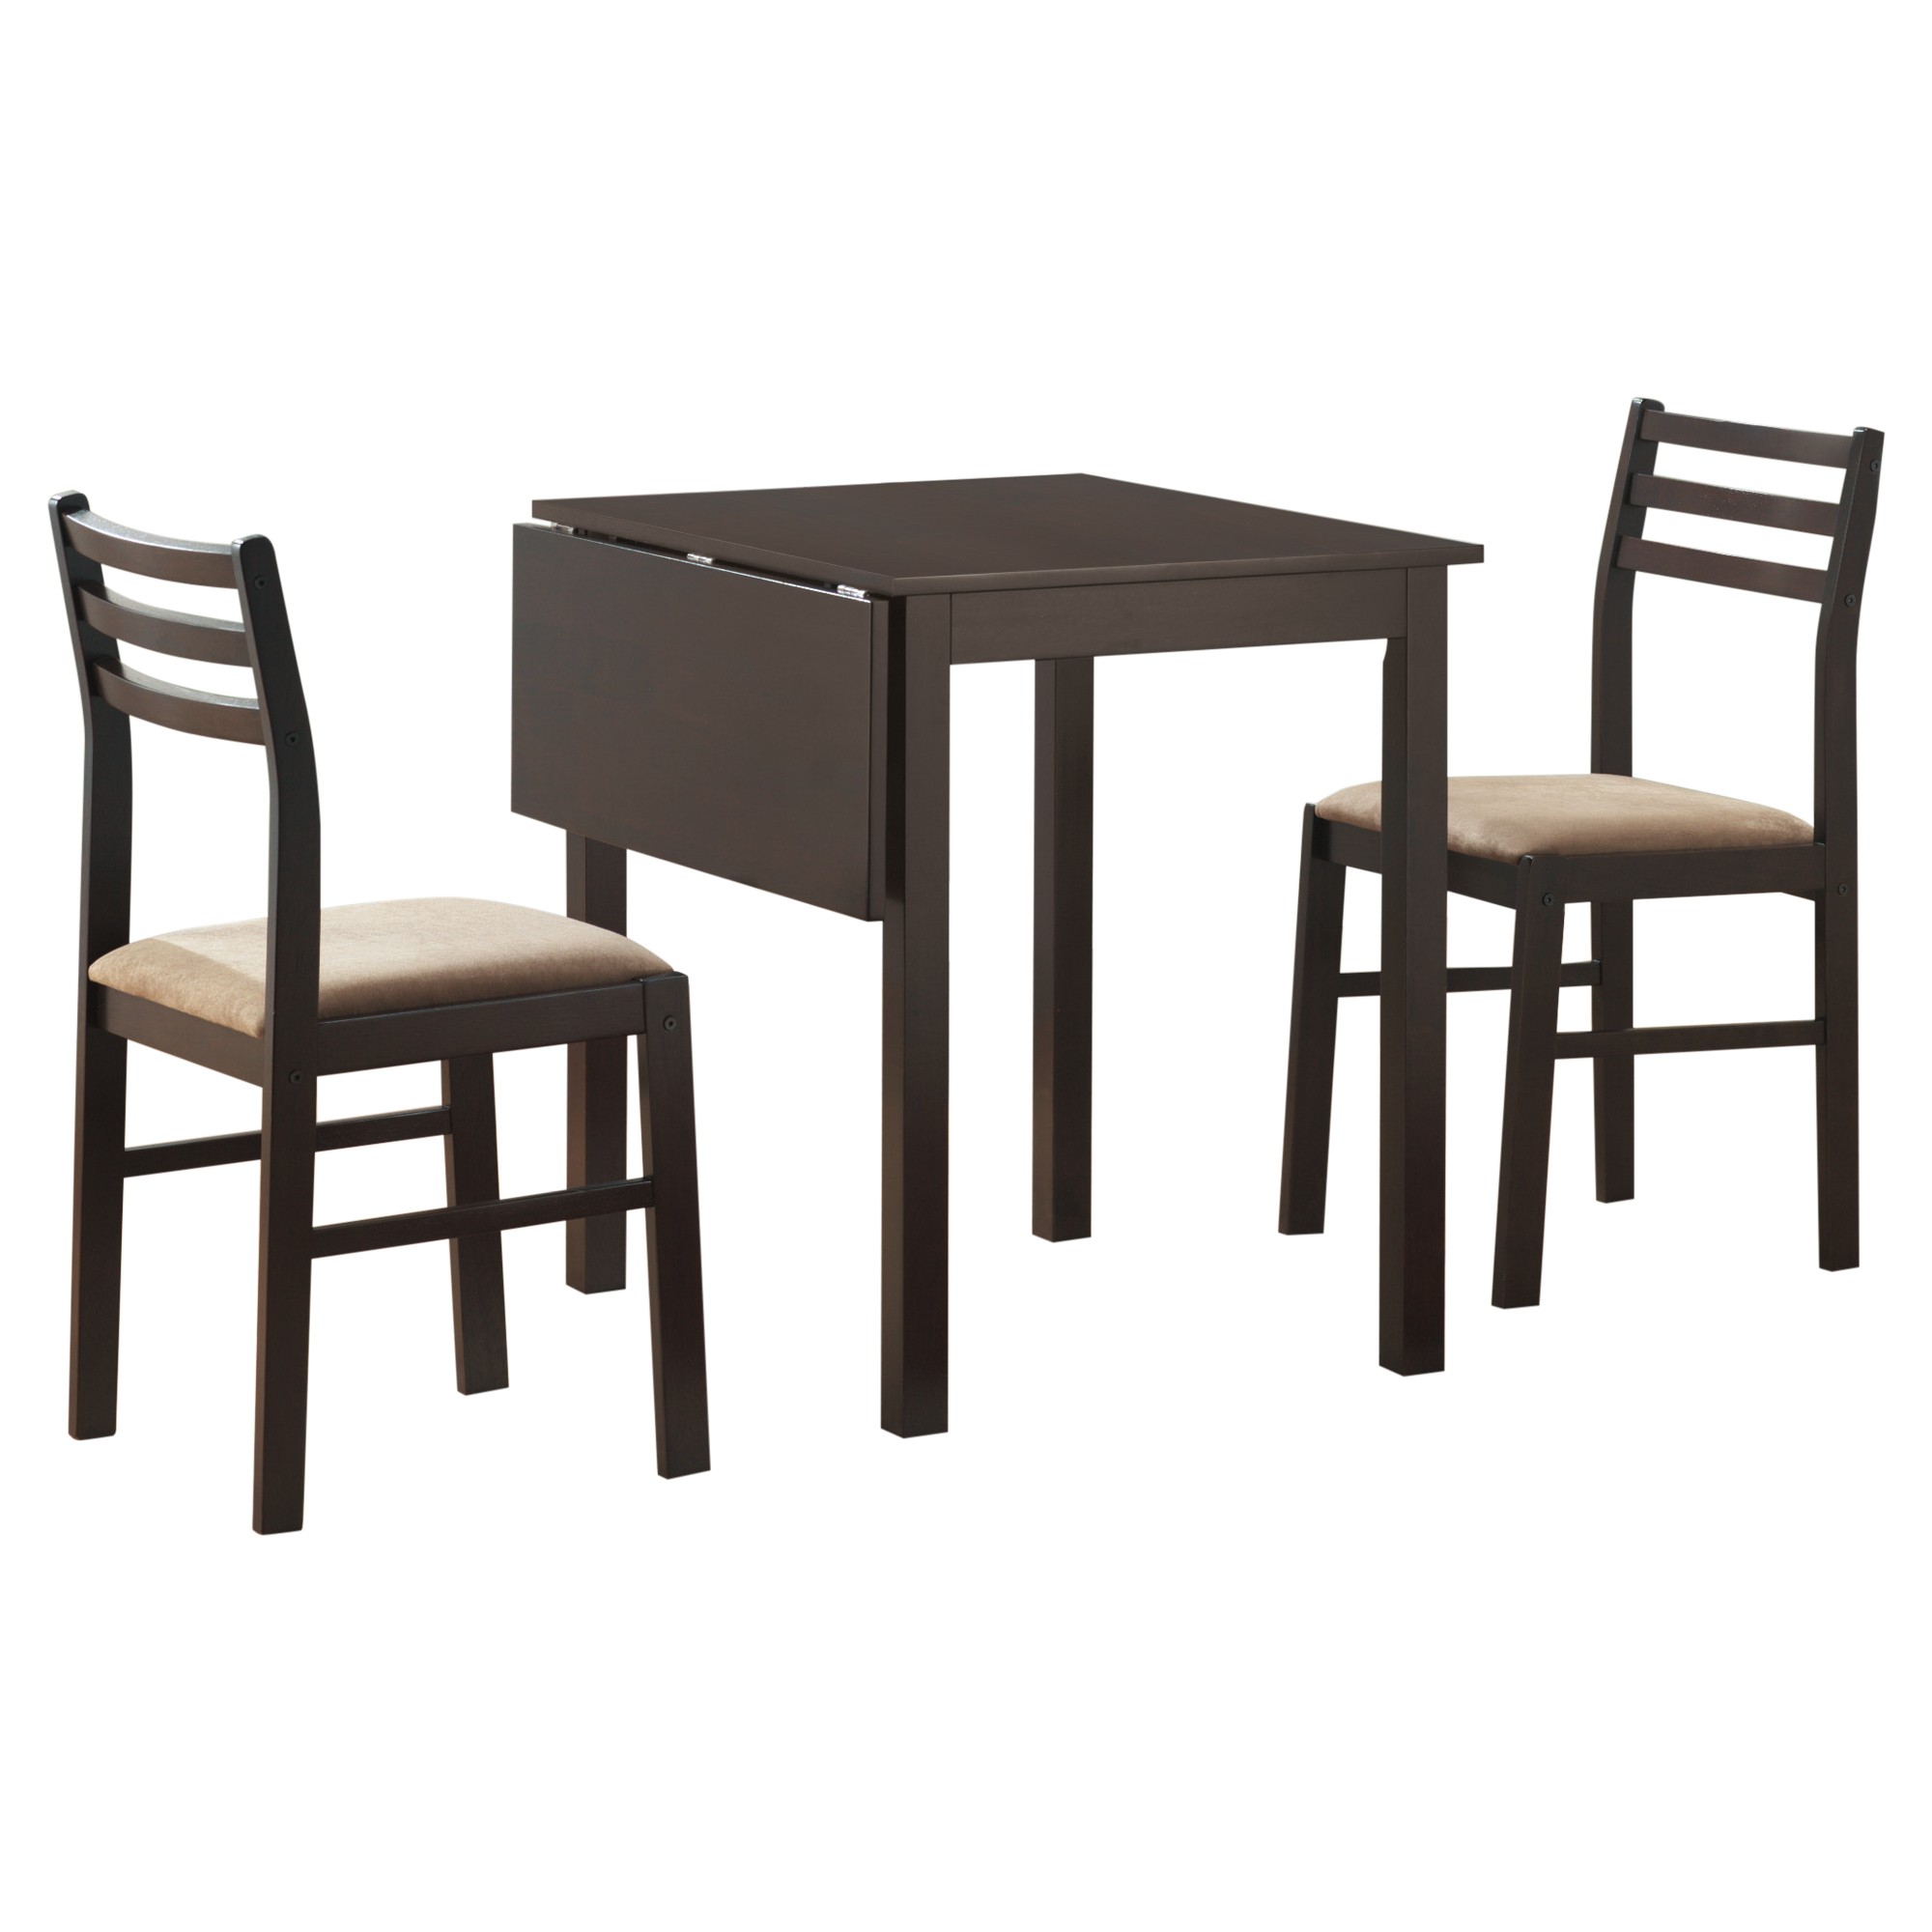 63" x 66.5" x 95" Cappuccino Beige Solid Wood Foam Polyester Blend 3pcs Dining Set